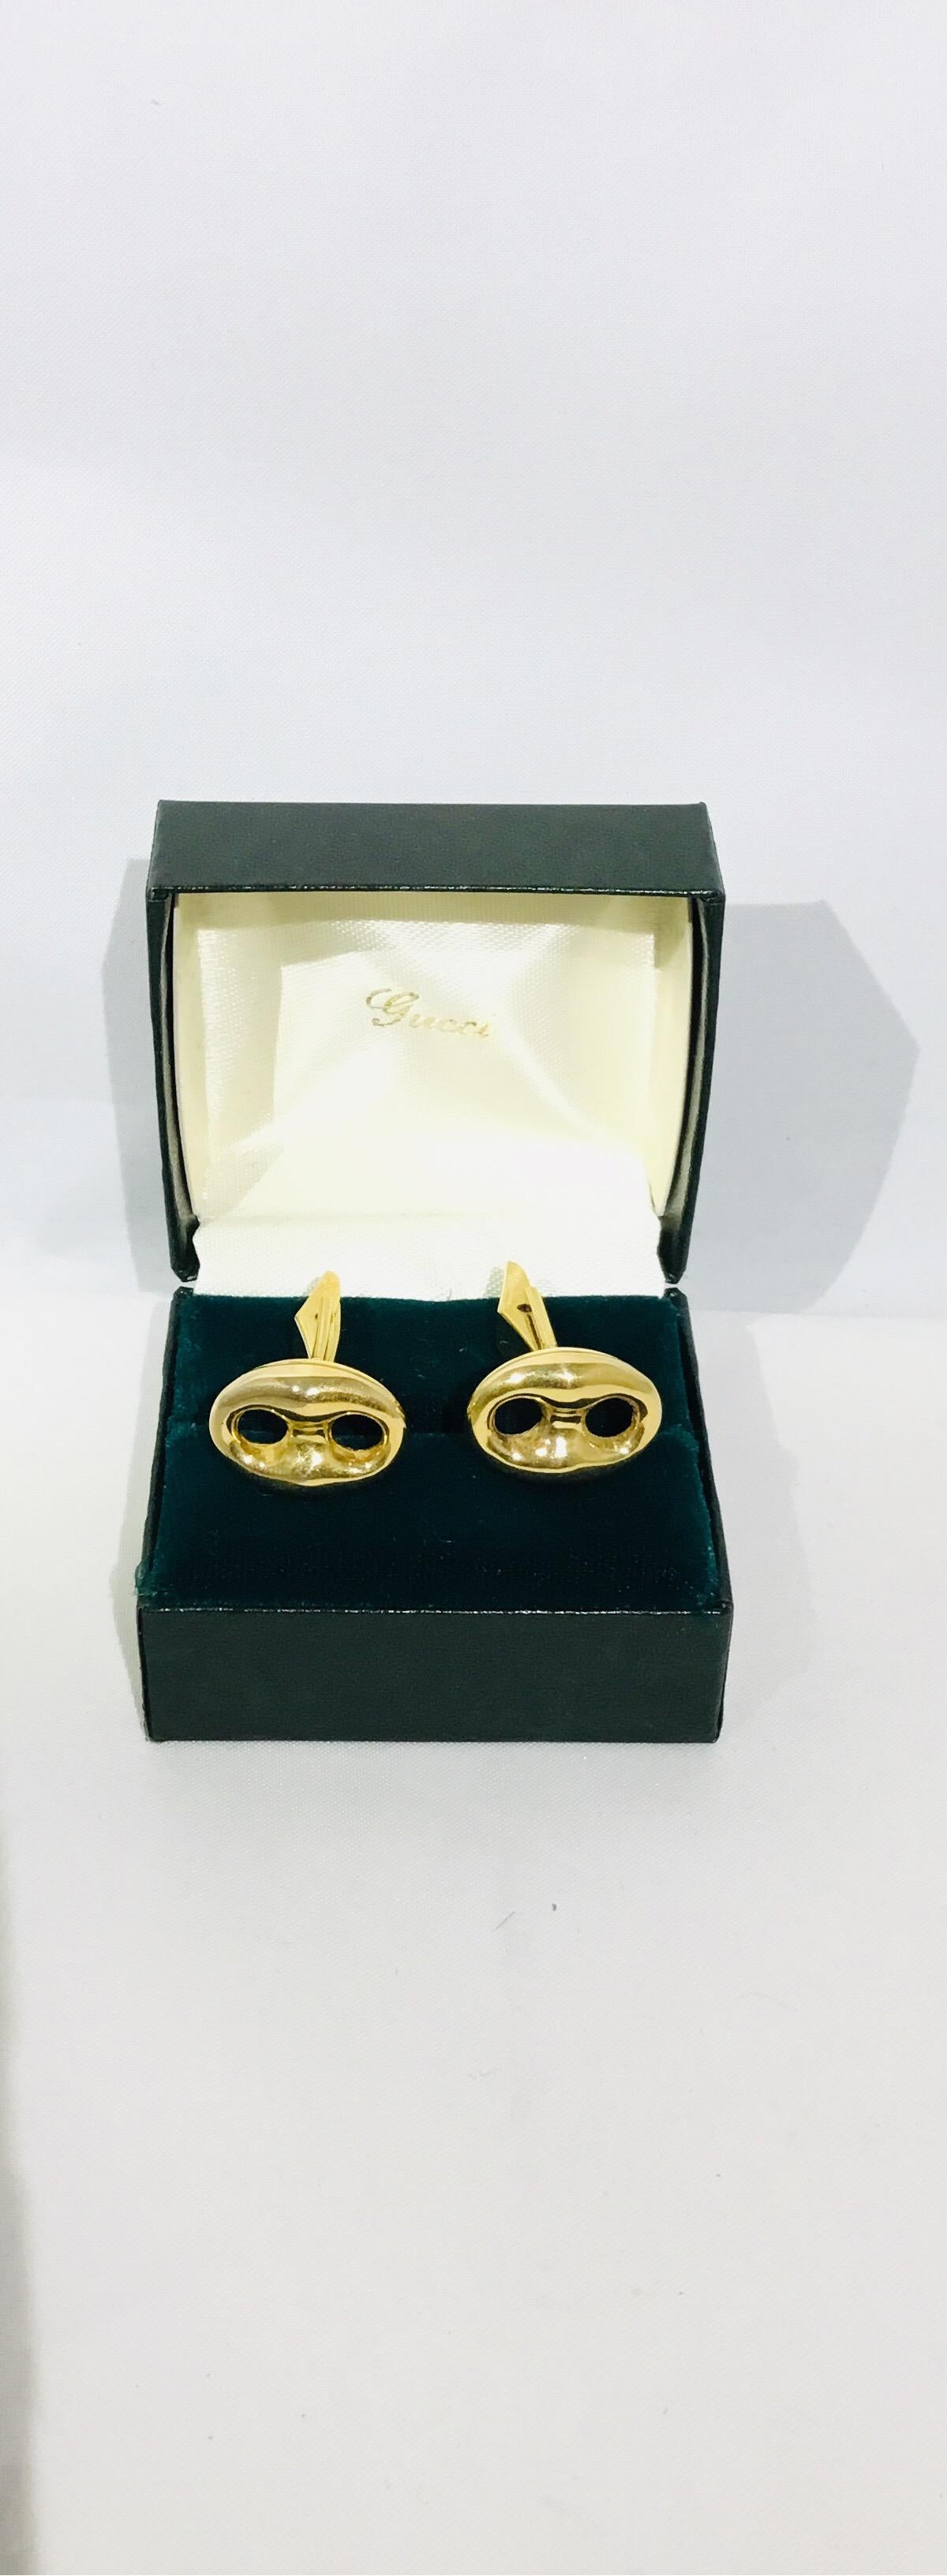 Gucci cufflinks featured in 18 k gold and with a Horsebit design. Cuff Links measure 1 cm x 2cm wide. Weight 8.66 grams. 

Original Box Included.